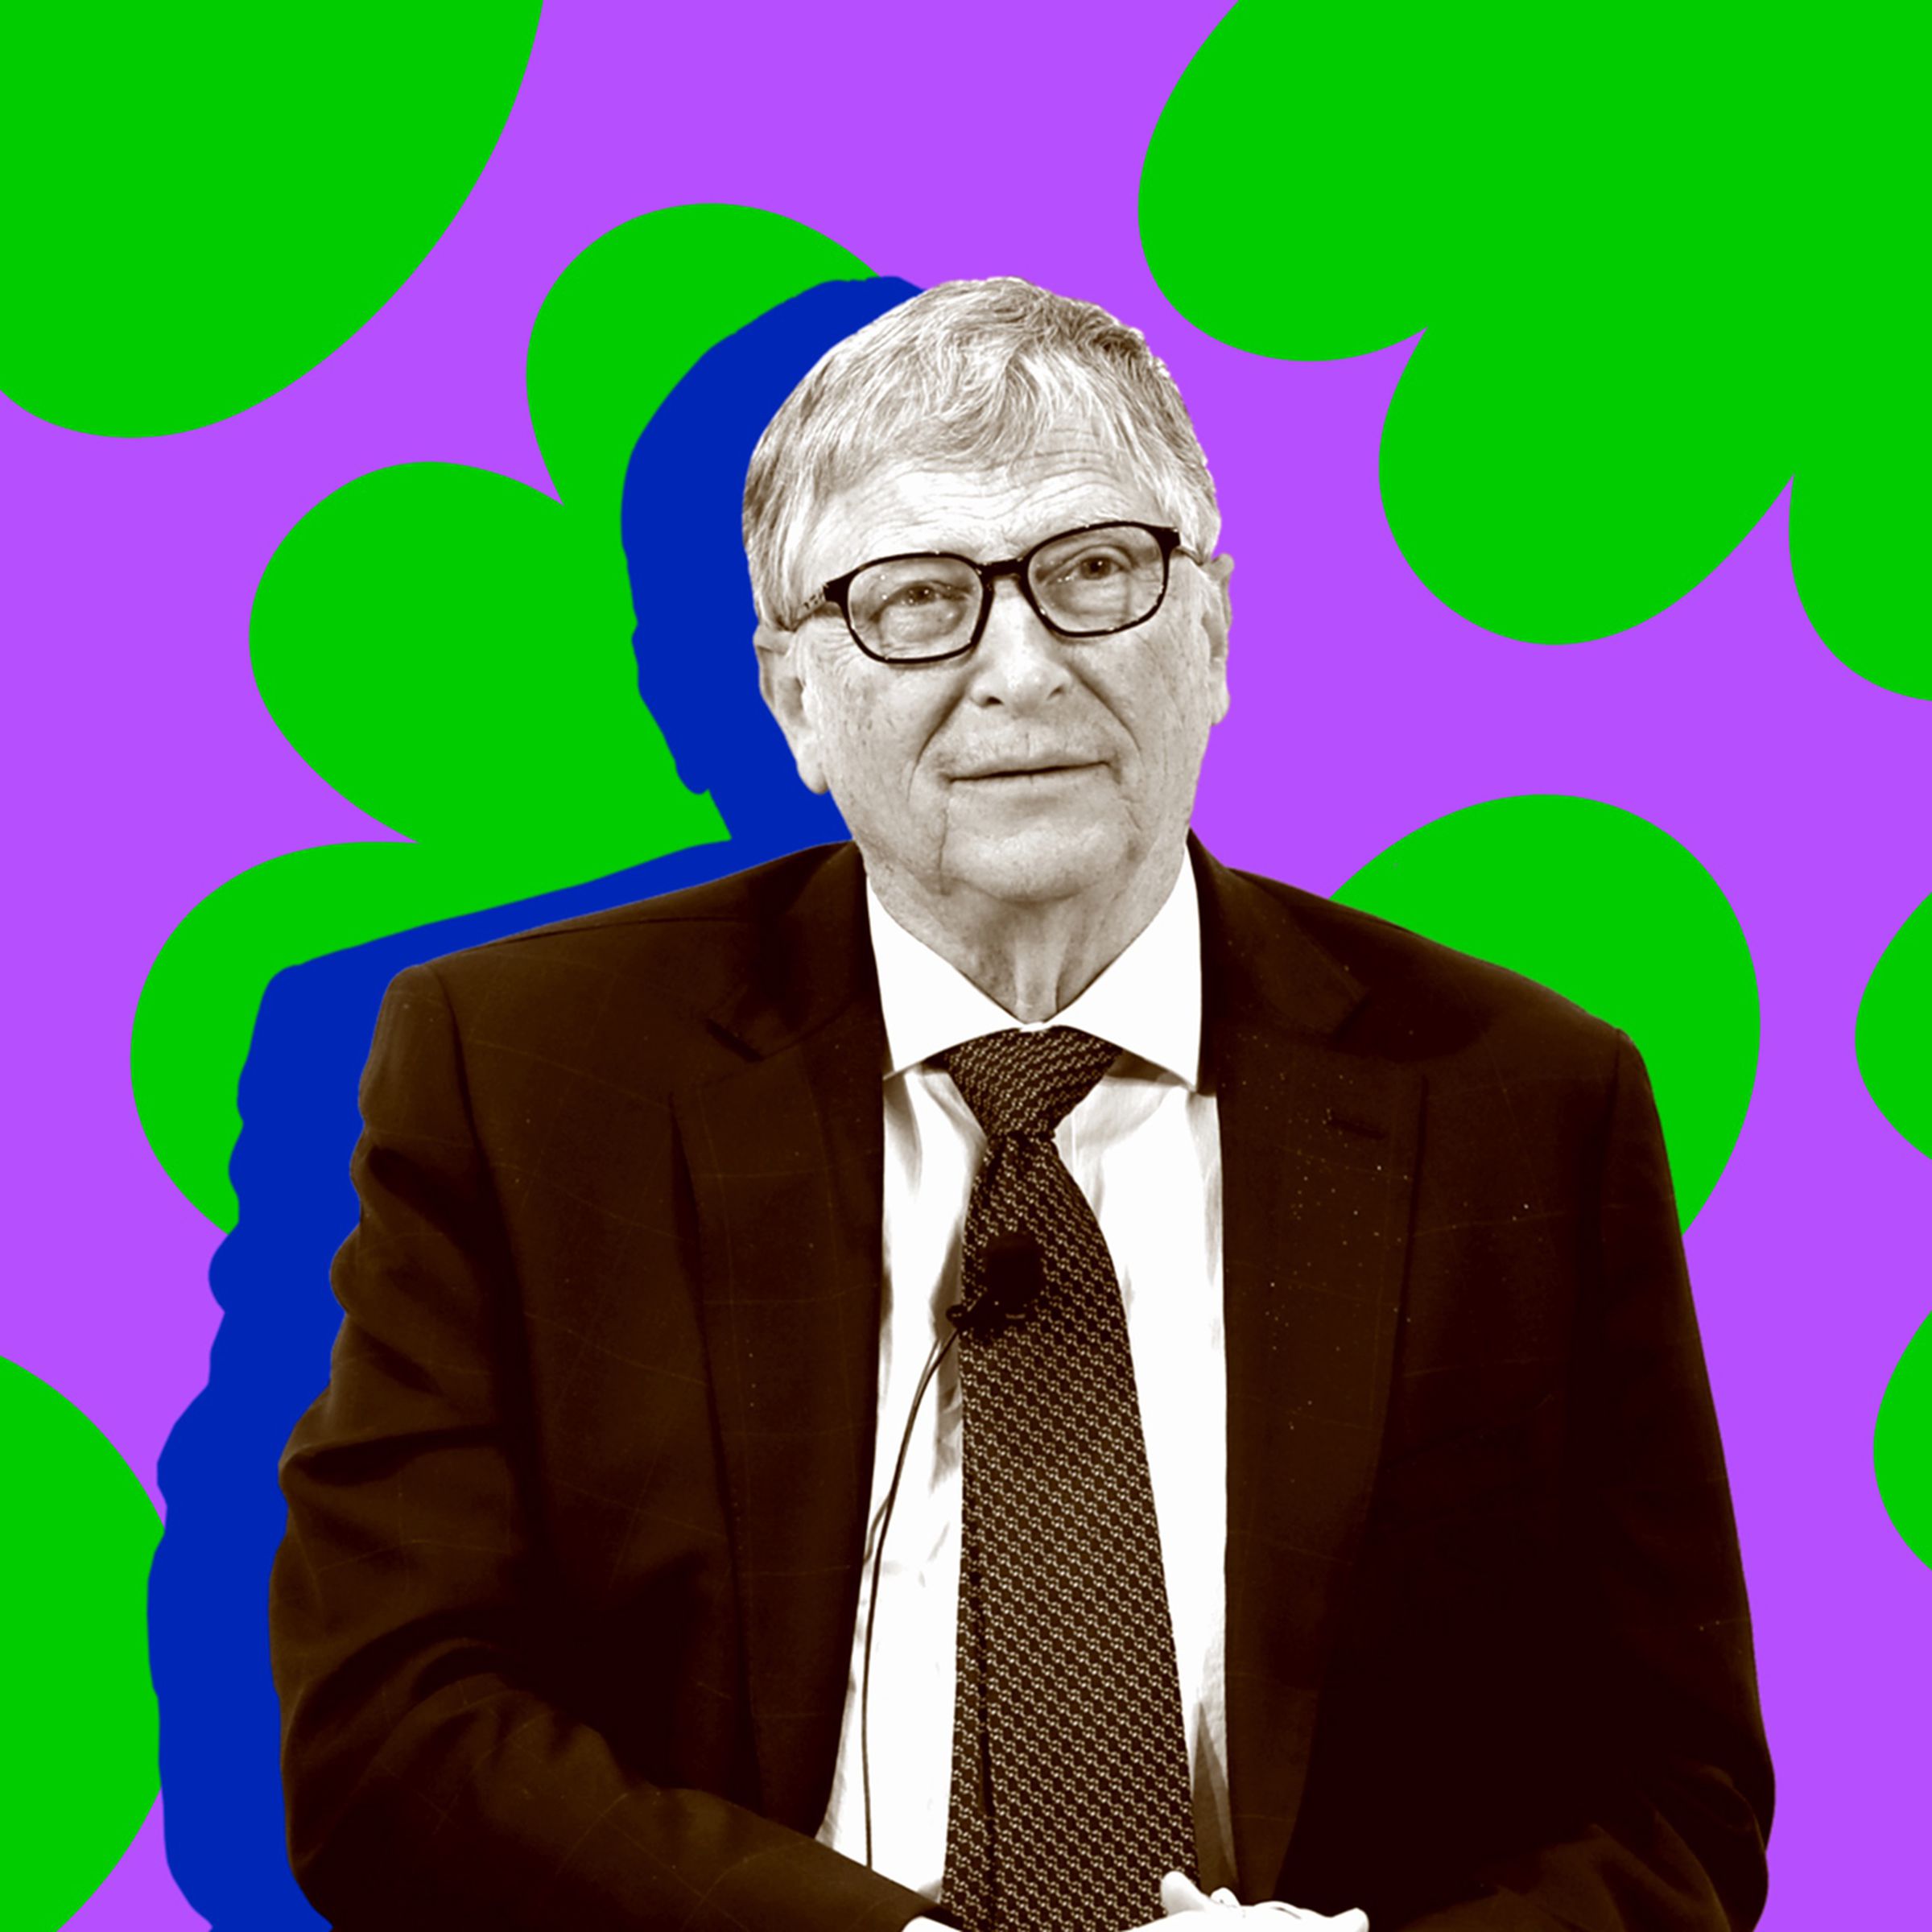 An image showing a photo of Bill Gates on a stylized background